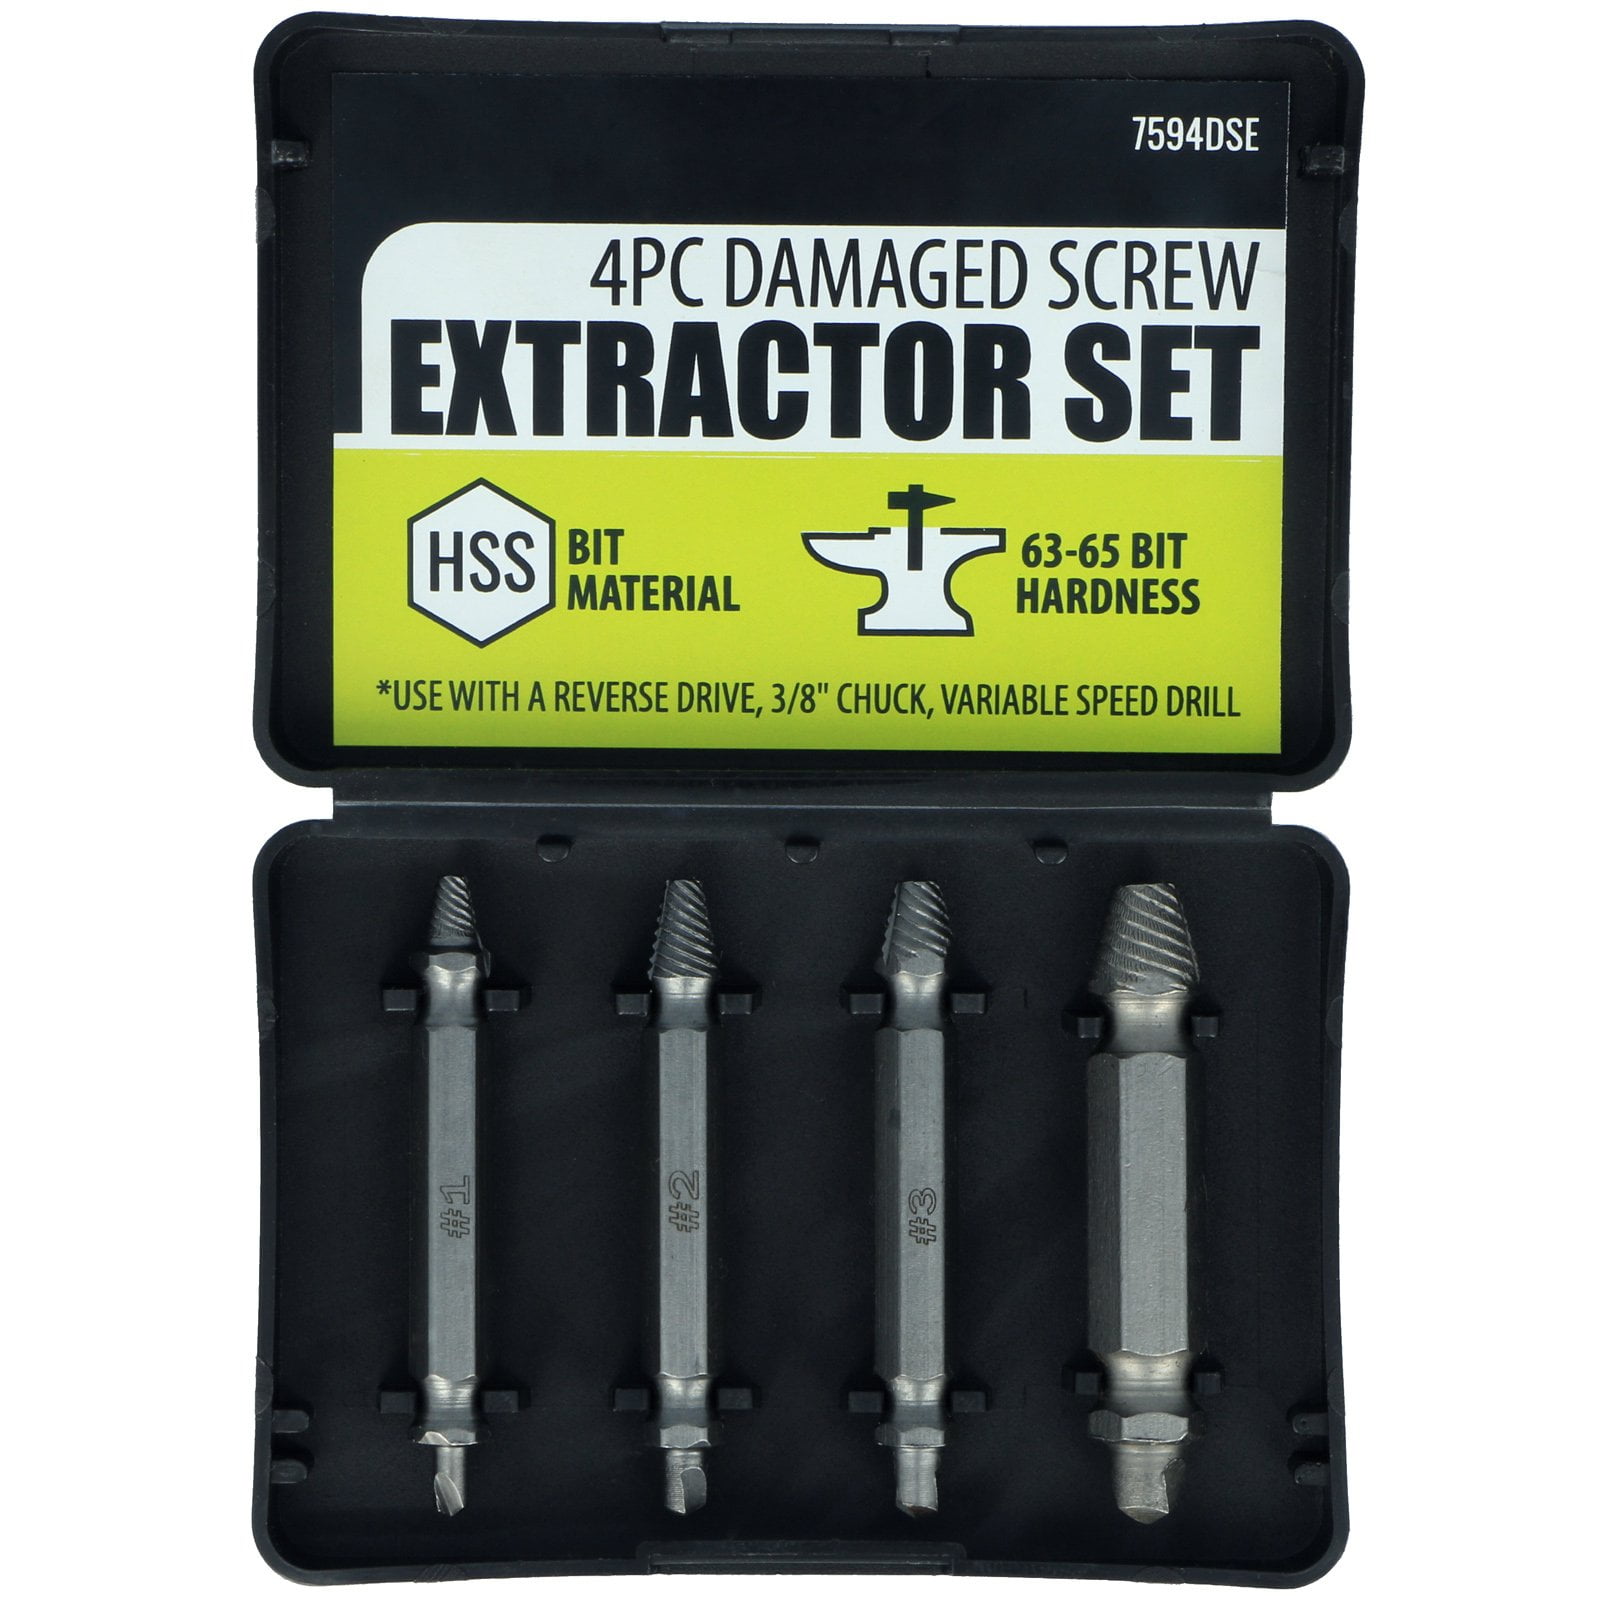 22 Pieces Damaged Screw Extractor Kit Stripped Screw Extractor Set DIY Hand Tools Gadgets Gifts for Men Hassle Free Broken Bolt Extractor Screw Remover Sets